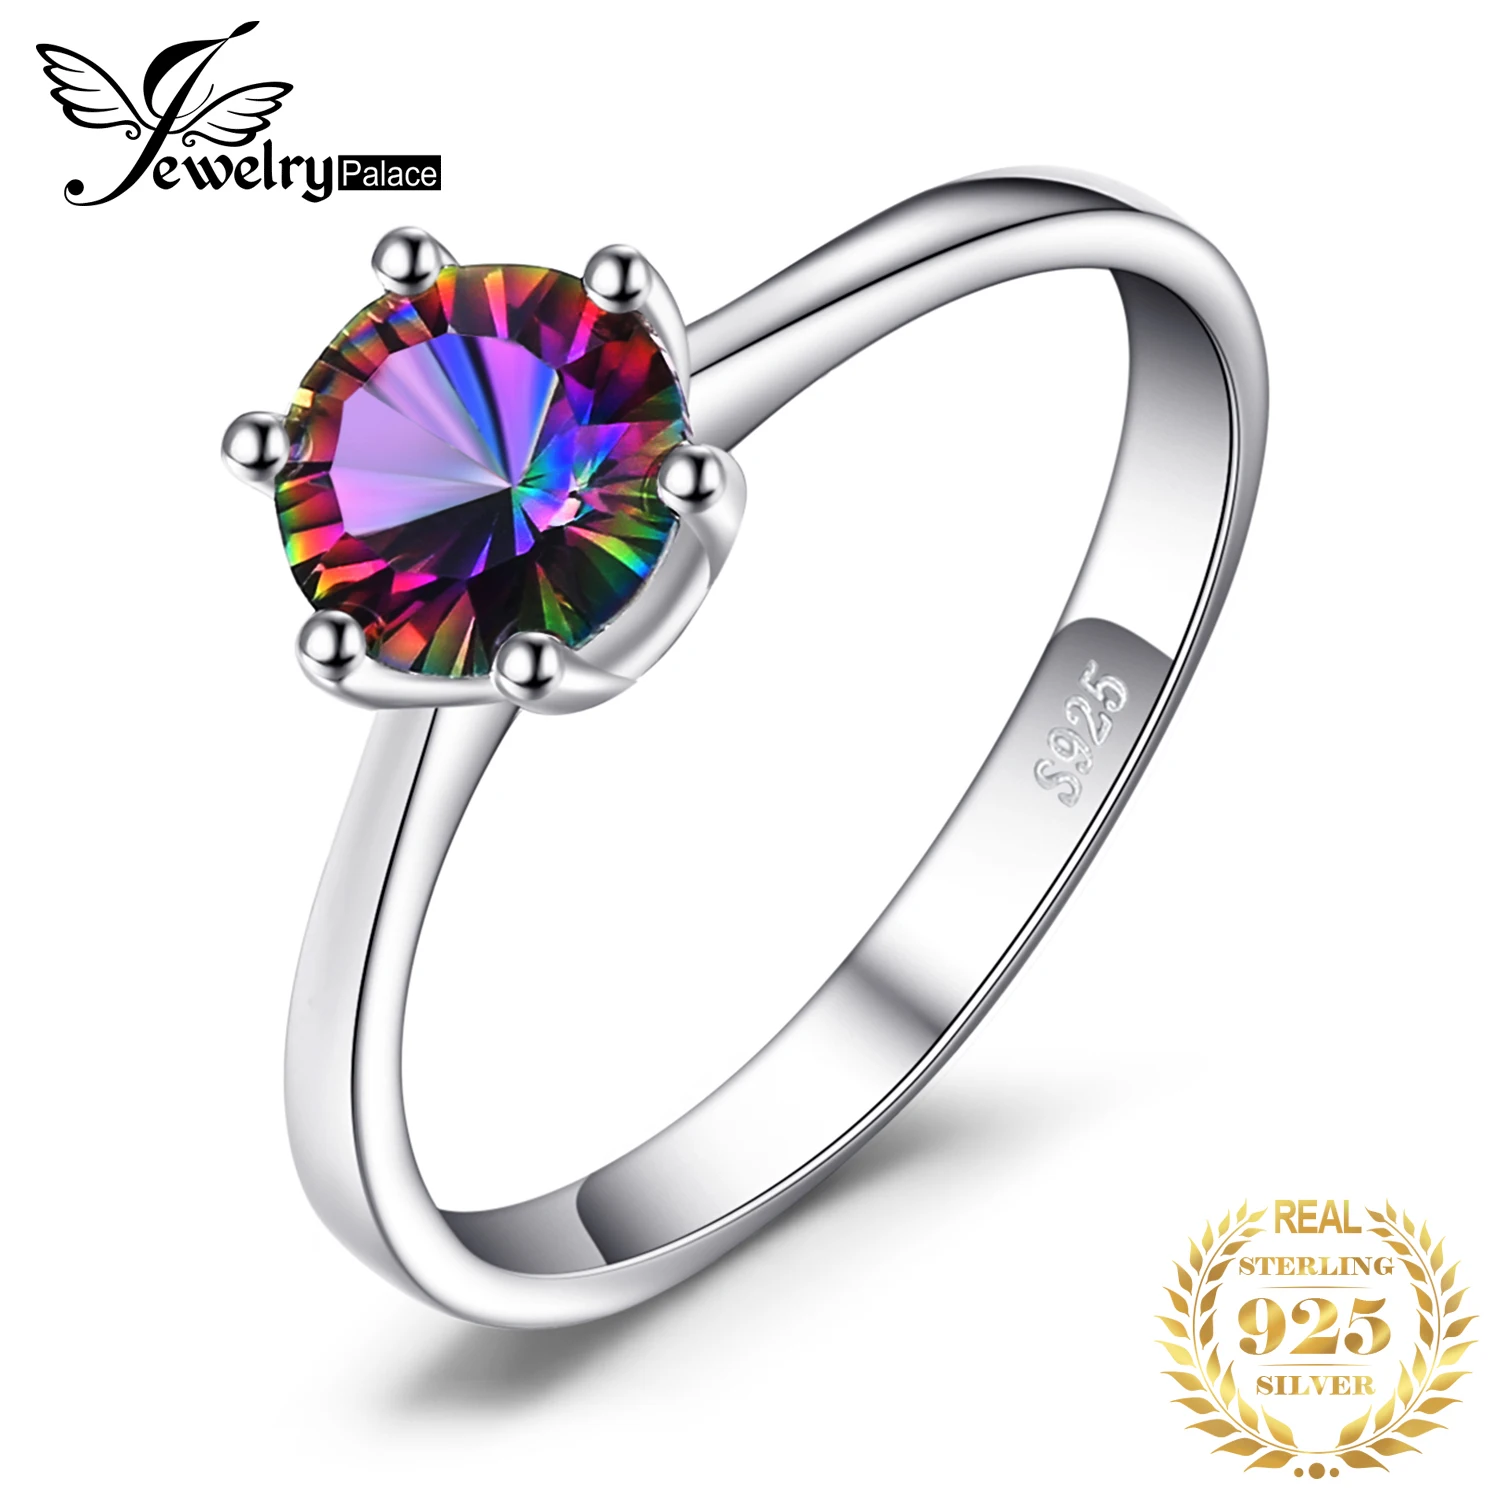 

JewelryPalace Genuine Natural Rainbow Mystic Topaz 925 Sterling Silver Ring for Women Solitaire Gemstone Jewelry Engagement Ring